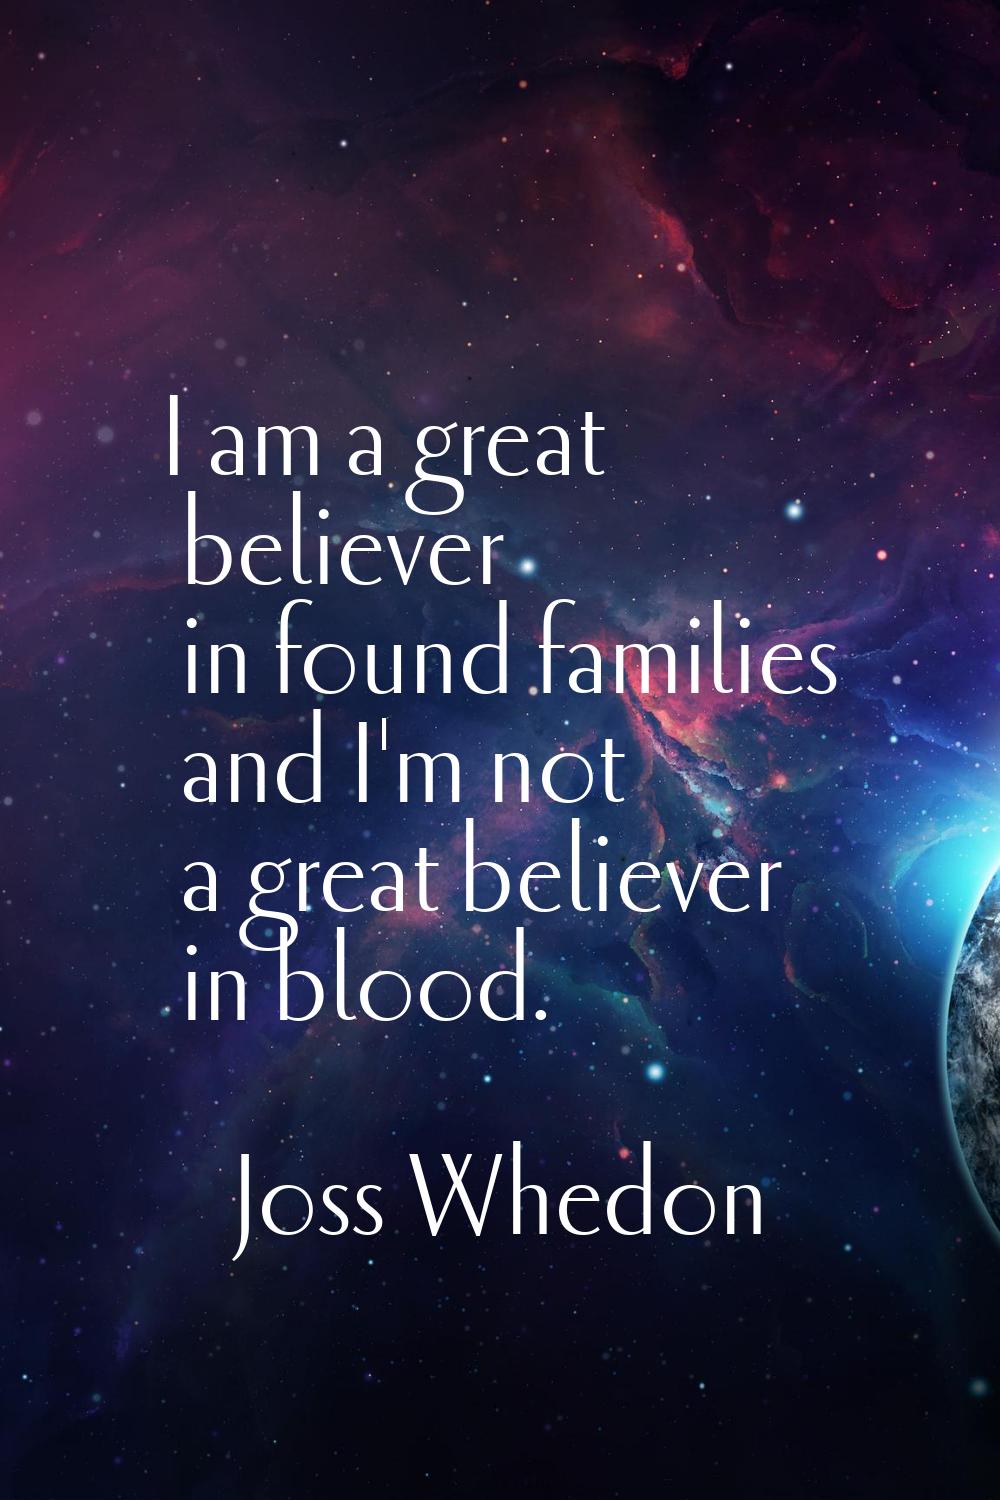 I am a great believer in found families and I'm not a great believer in blood.